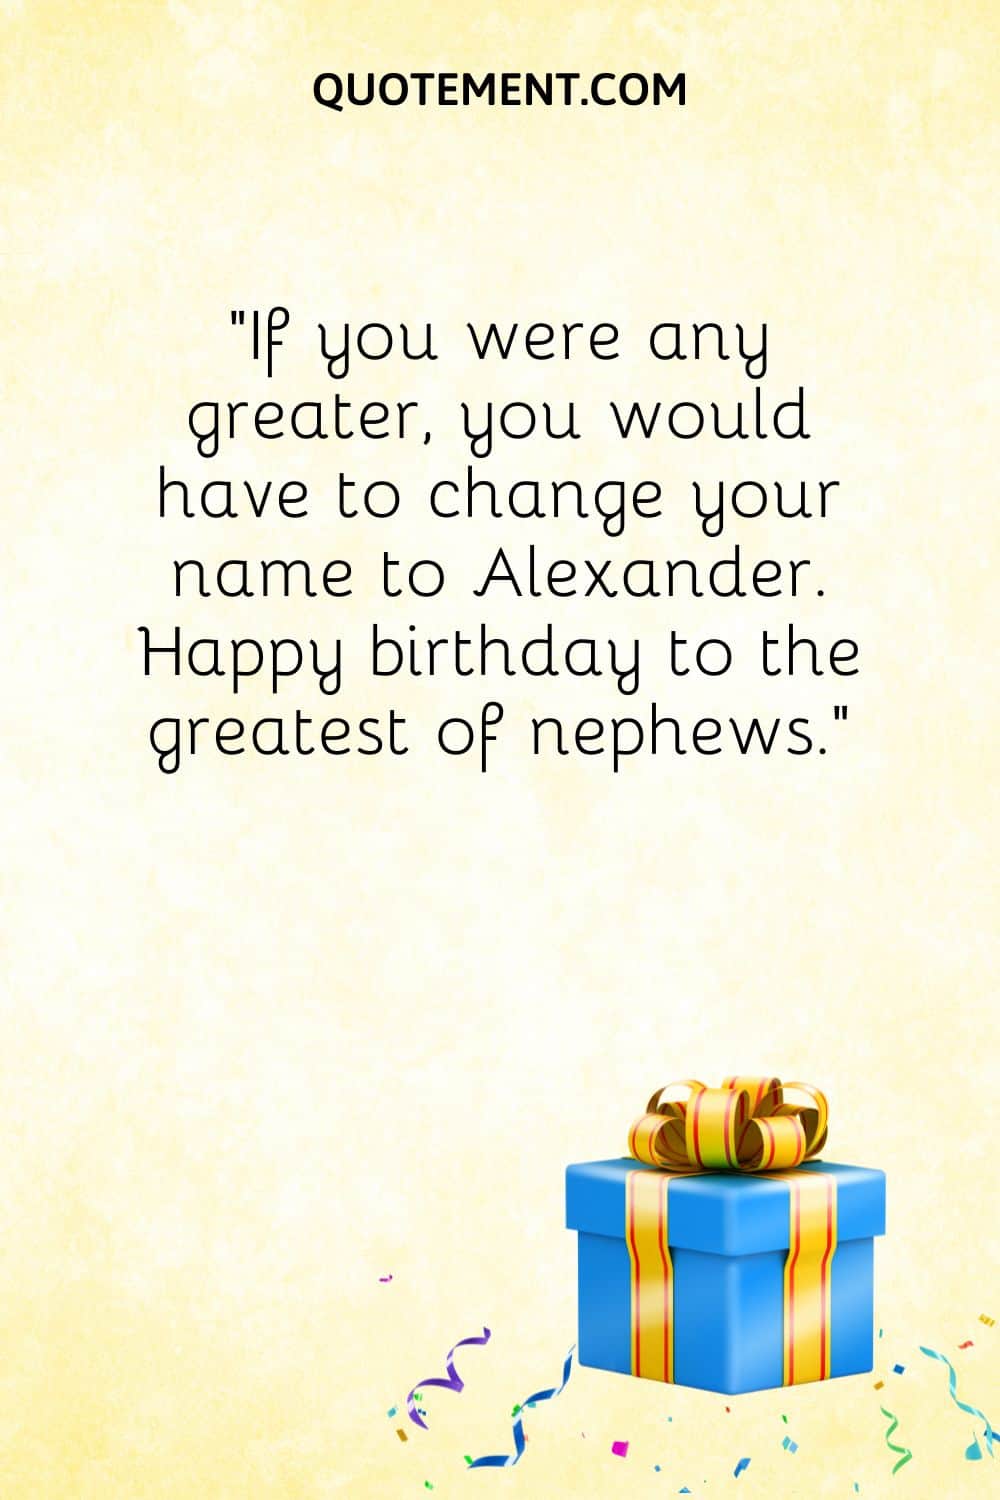 “If you were any greater, you would have to change your name to Alexander. Happy birthday to the greatest of nephews.”